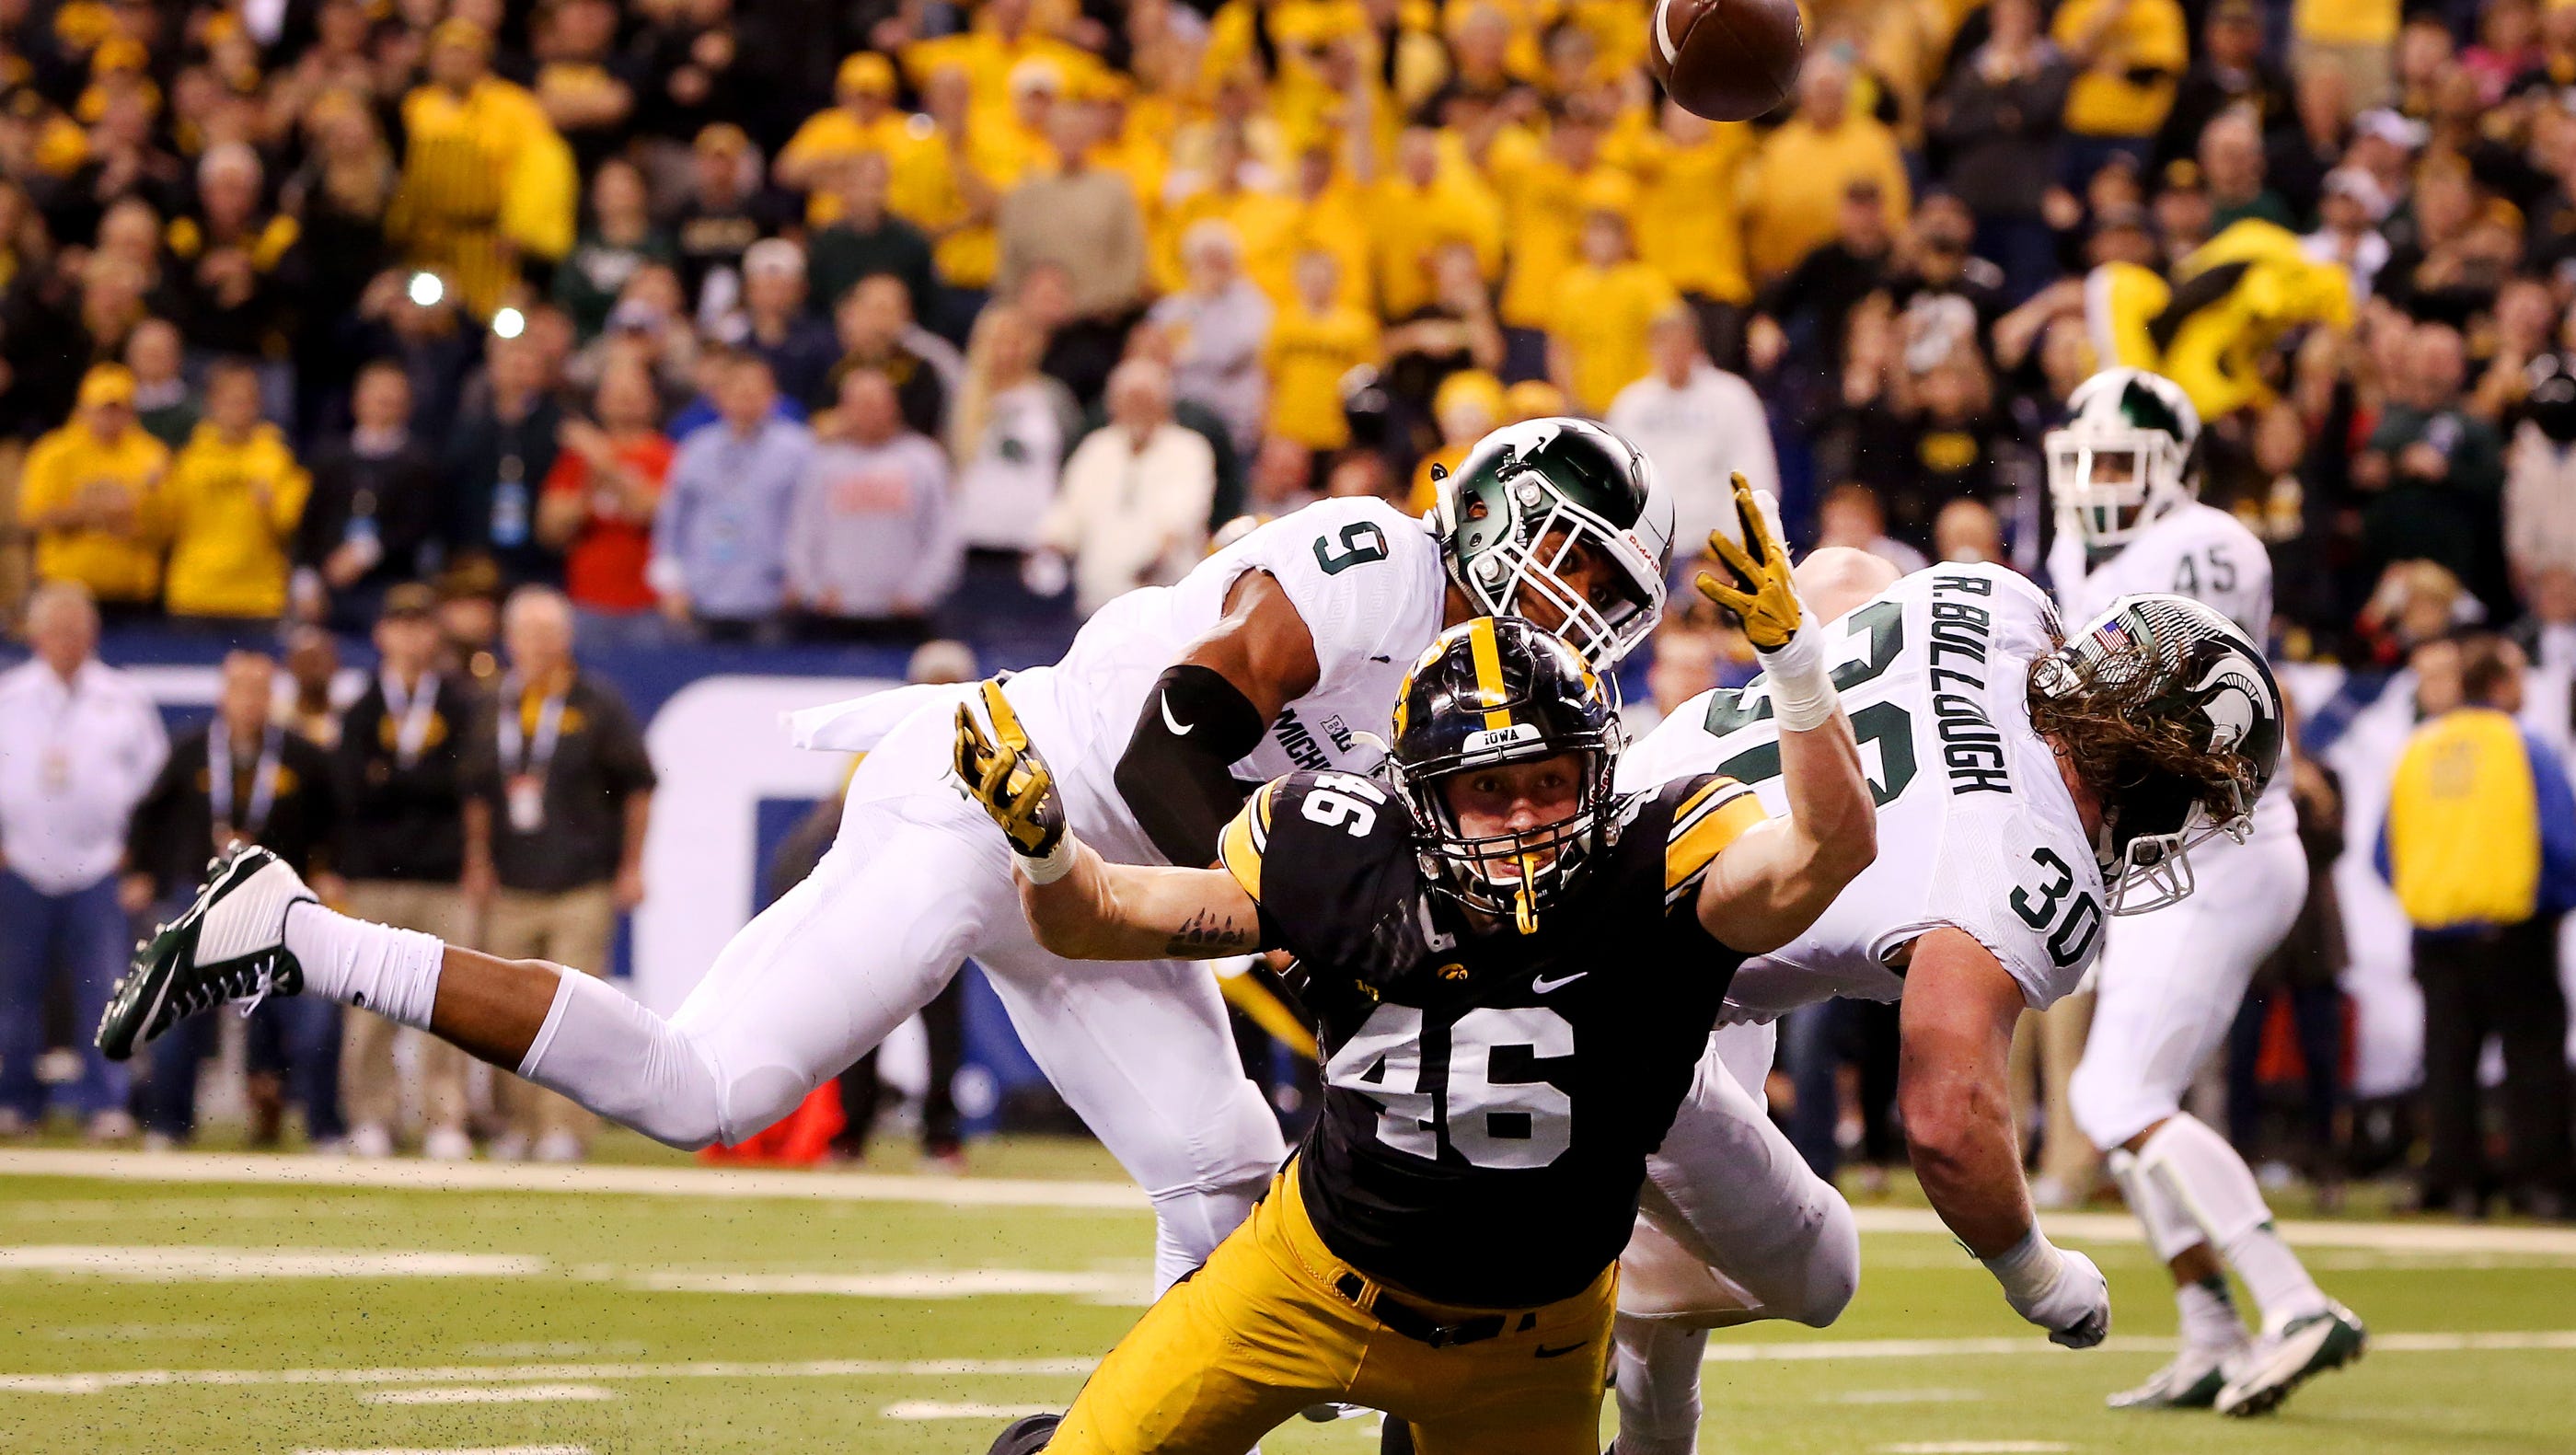 Iowa tight end George Kittle (46) is hit as he attempted a catch in the end zone by Michigan State linebacker Riley Bullough (30) during the Big Ten Championship Game at Lucas Oil Stadium on Dec. 5, 2015. The pass was later intercepted.